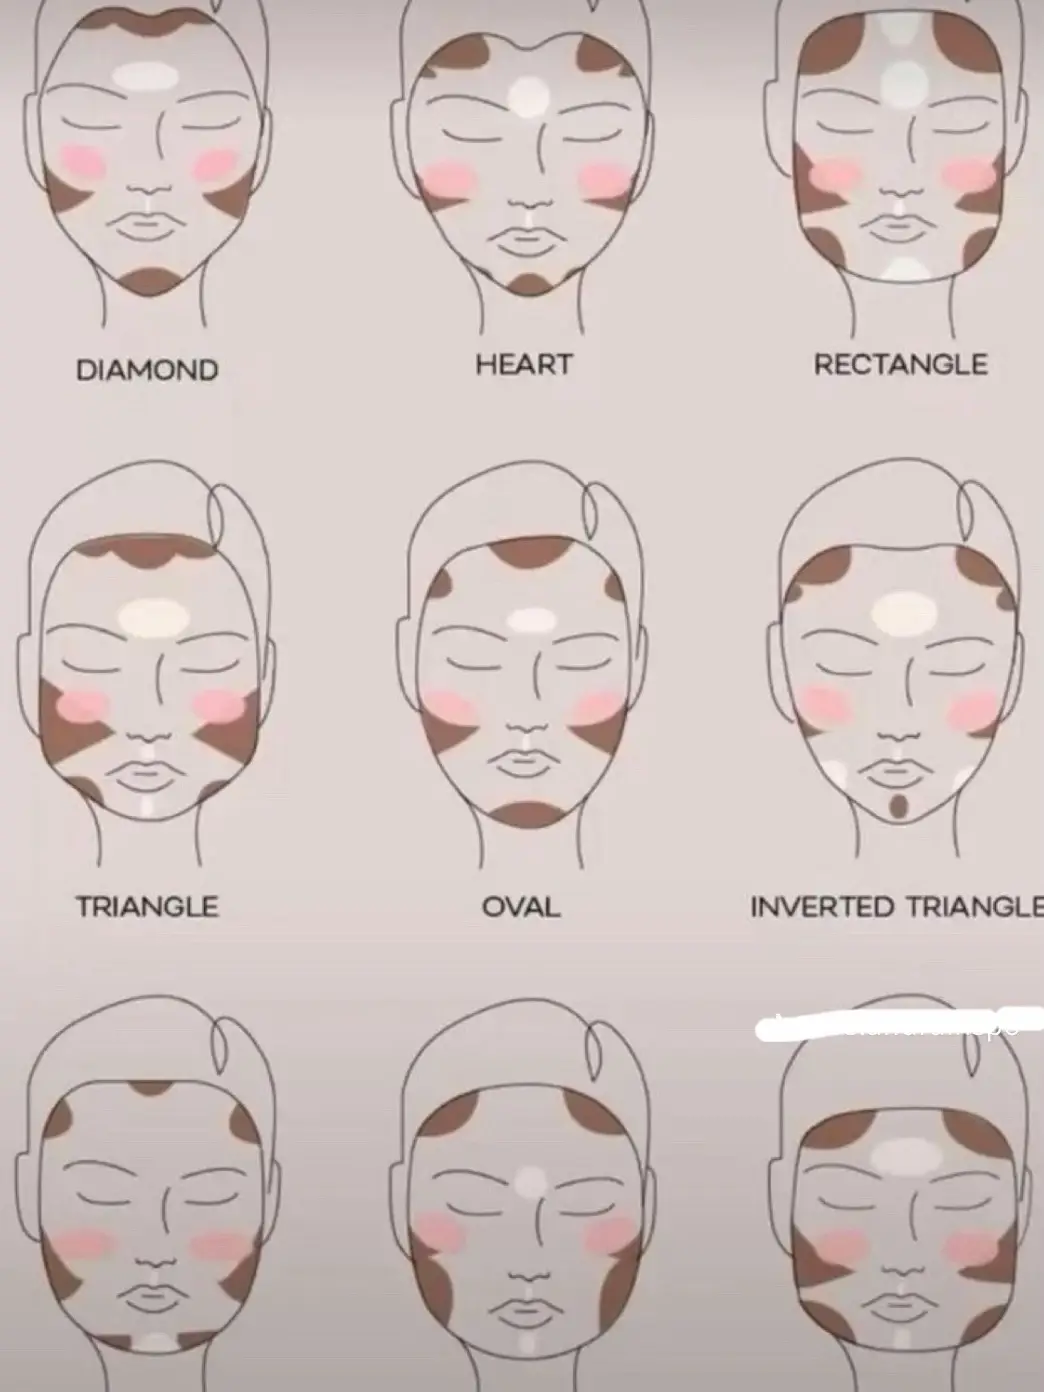 inverted triangle face shape makeup 💌💌 lmk what yall think 😉🫶🏽 #c